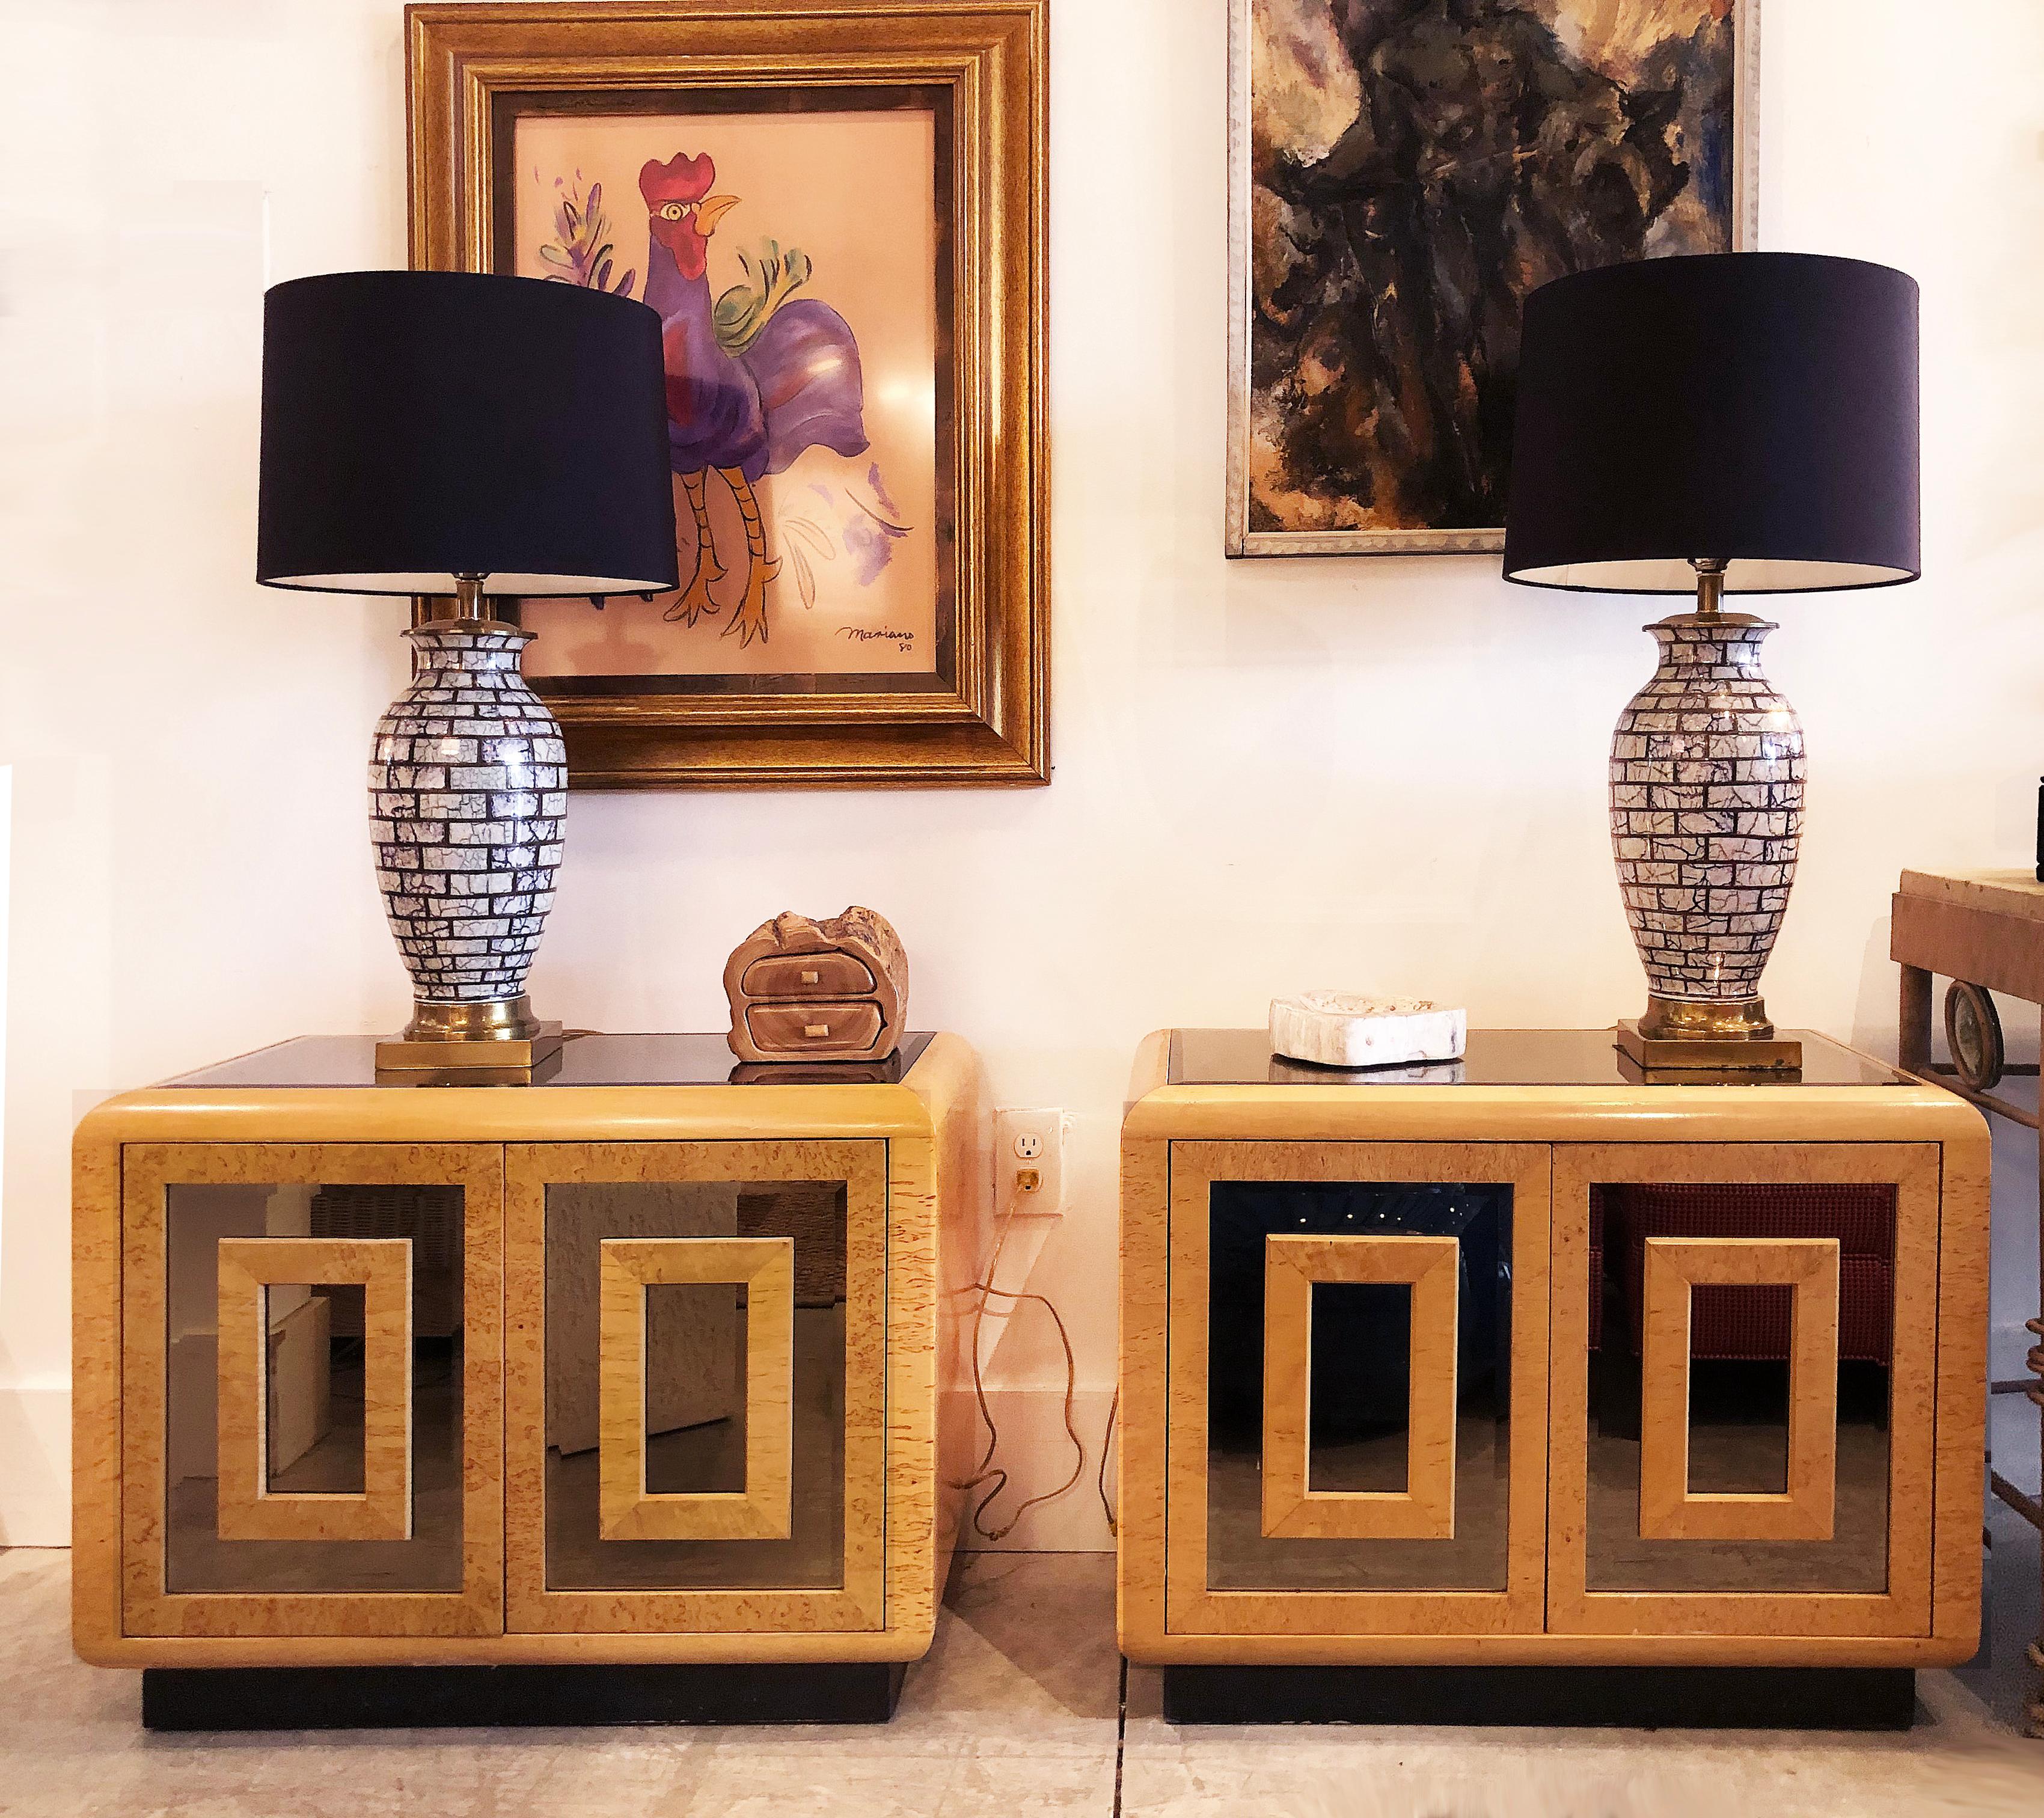 1980s RomWeber patterened maple mirror nightstands

Offered is a substantial pair of 1980s modern RomWeber Furniture Nightstands created with great patterned matched maple veneers with smoked beveled mirror doors and inset smoked mirrored tops. Each